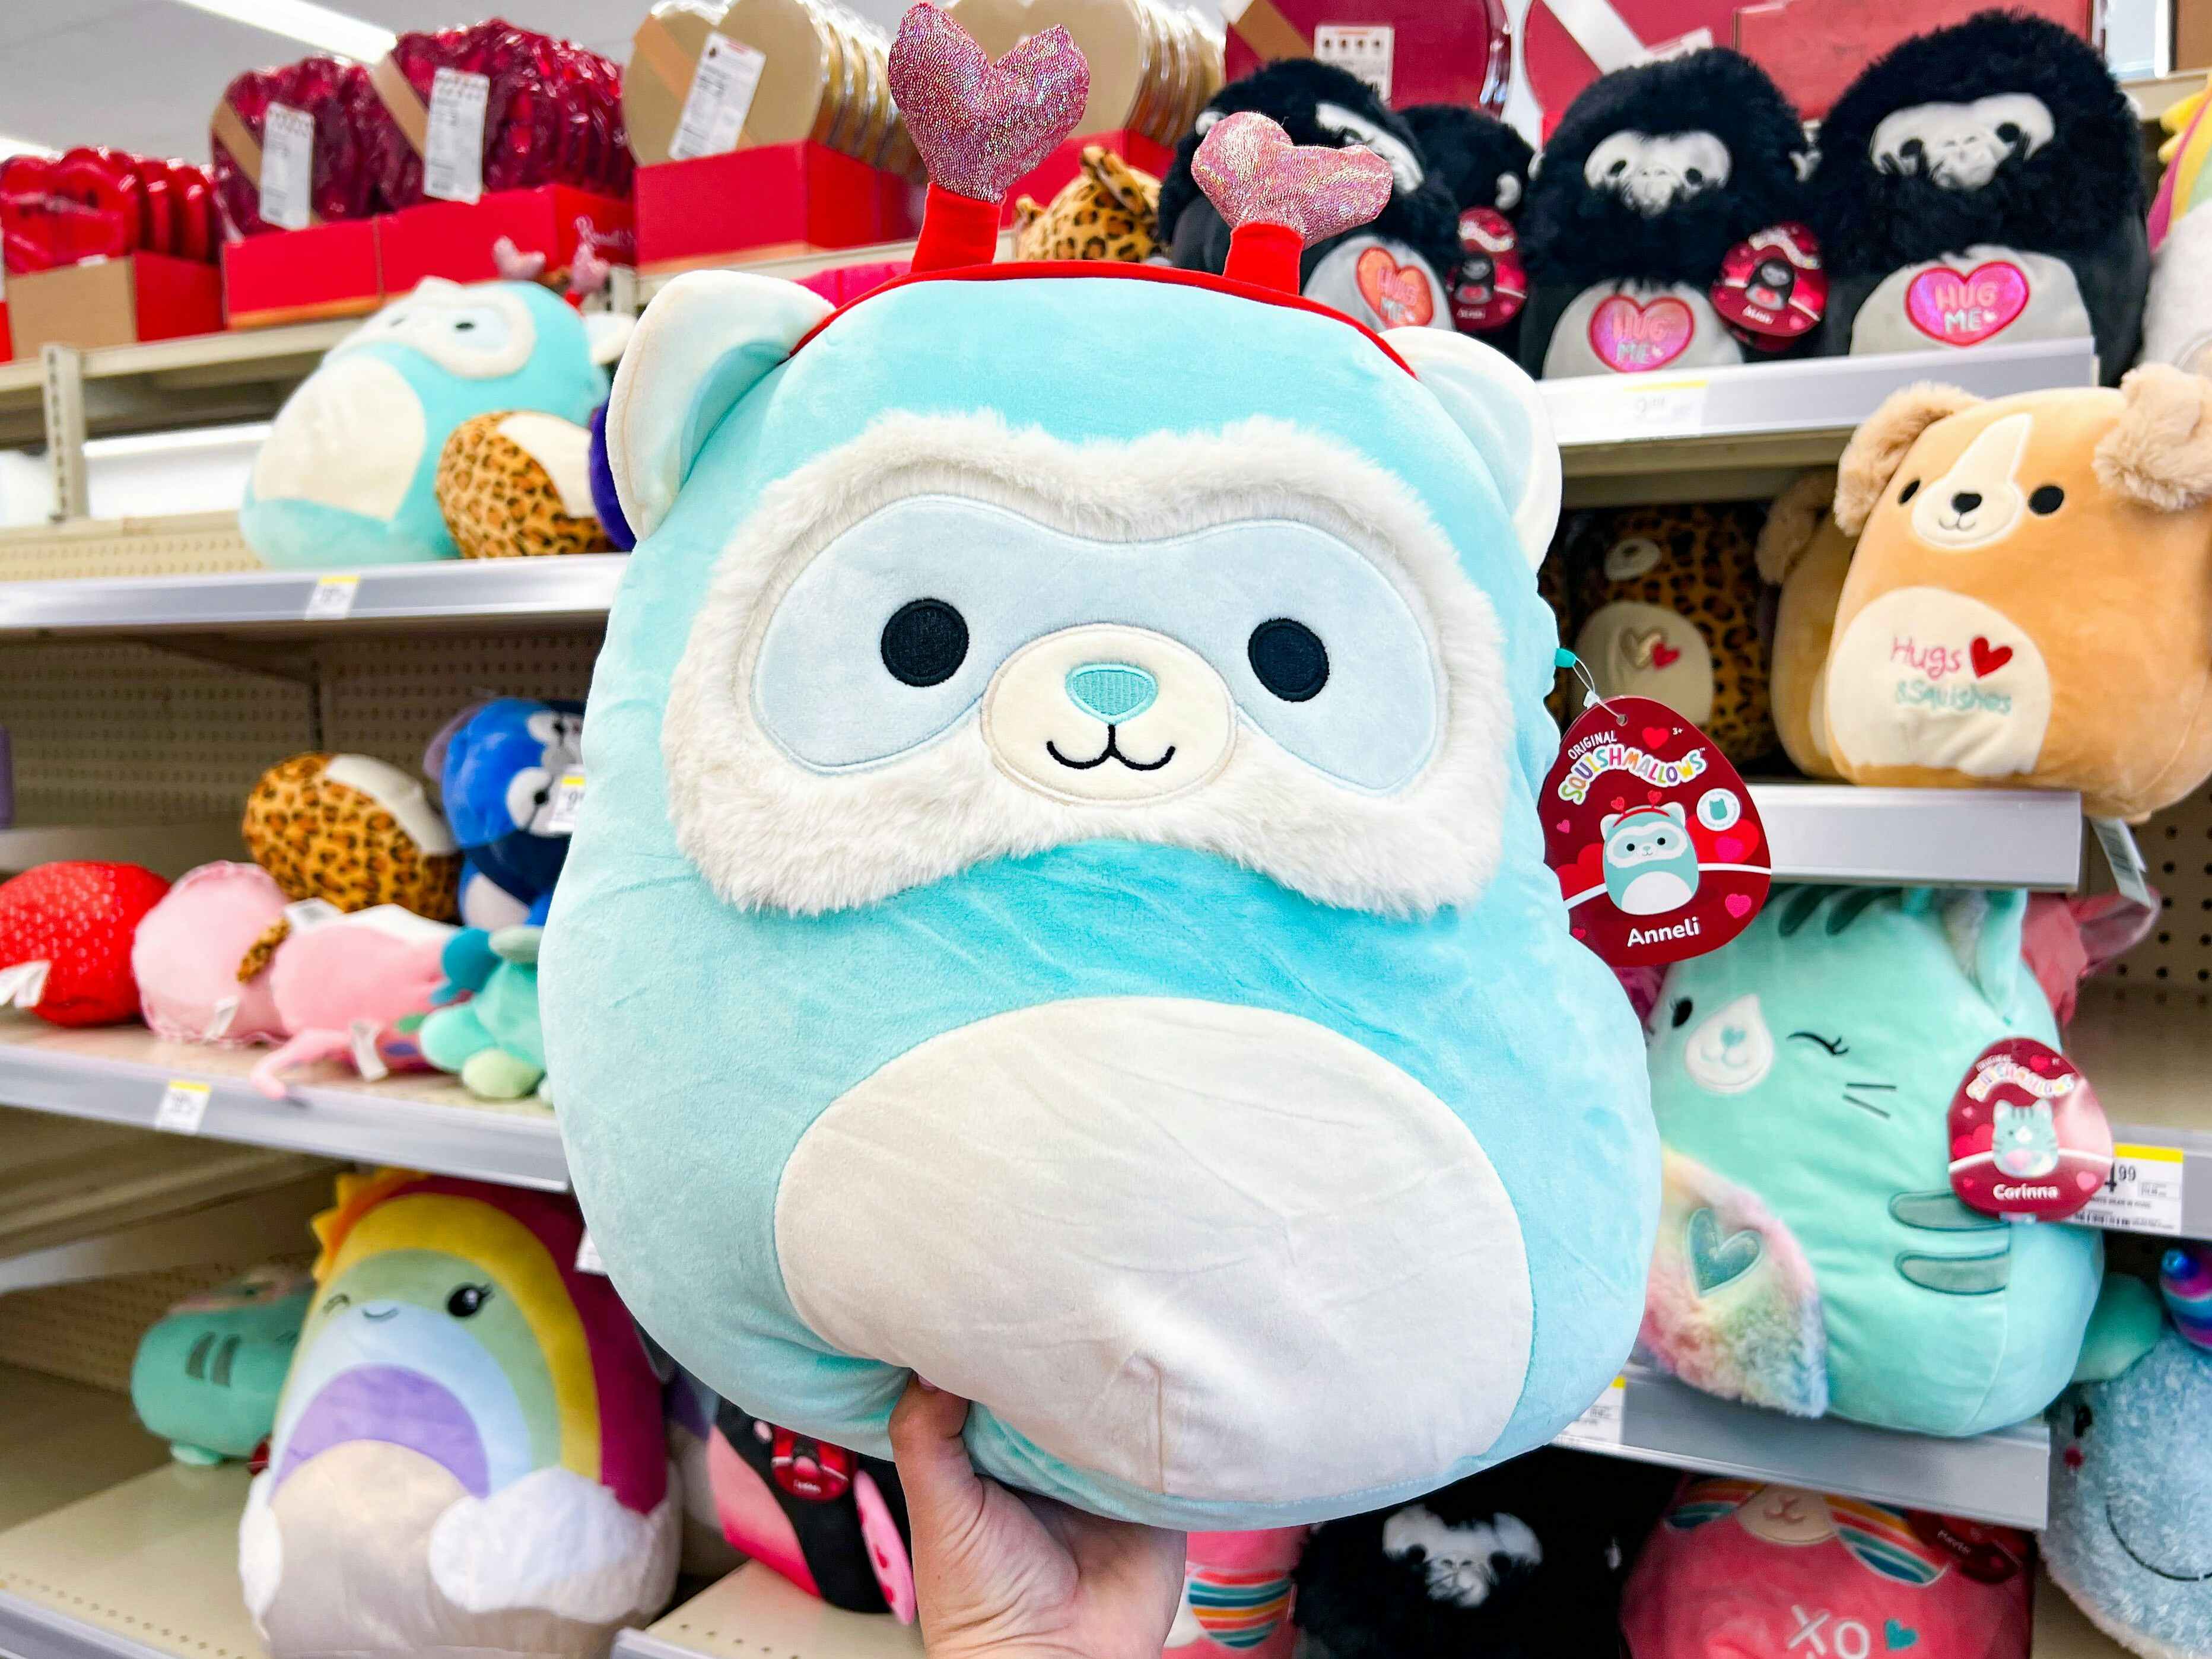 Someone holding up an Anneli Valentine's Day Squishmallow in Walgreens